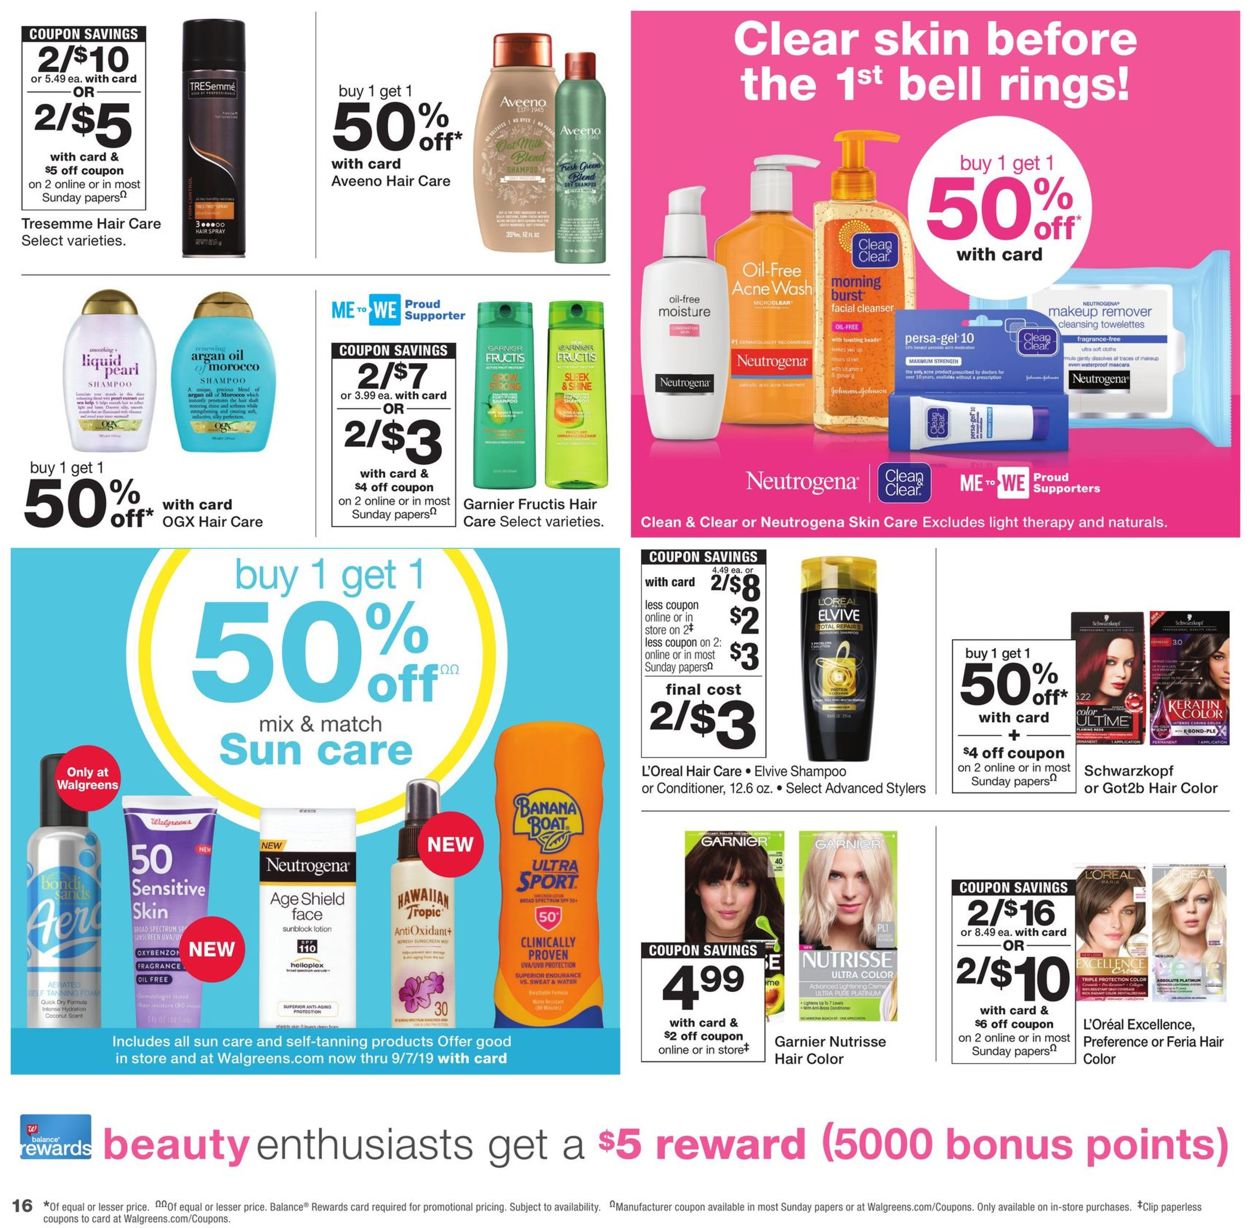 olay-mail-in-rebate-make-50-olay-product-purchase-score-20-pre